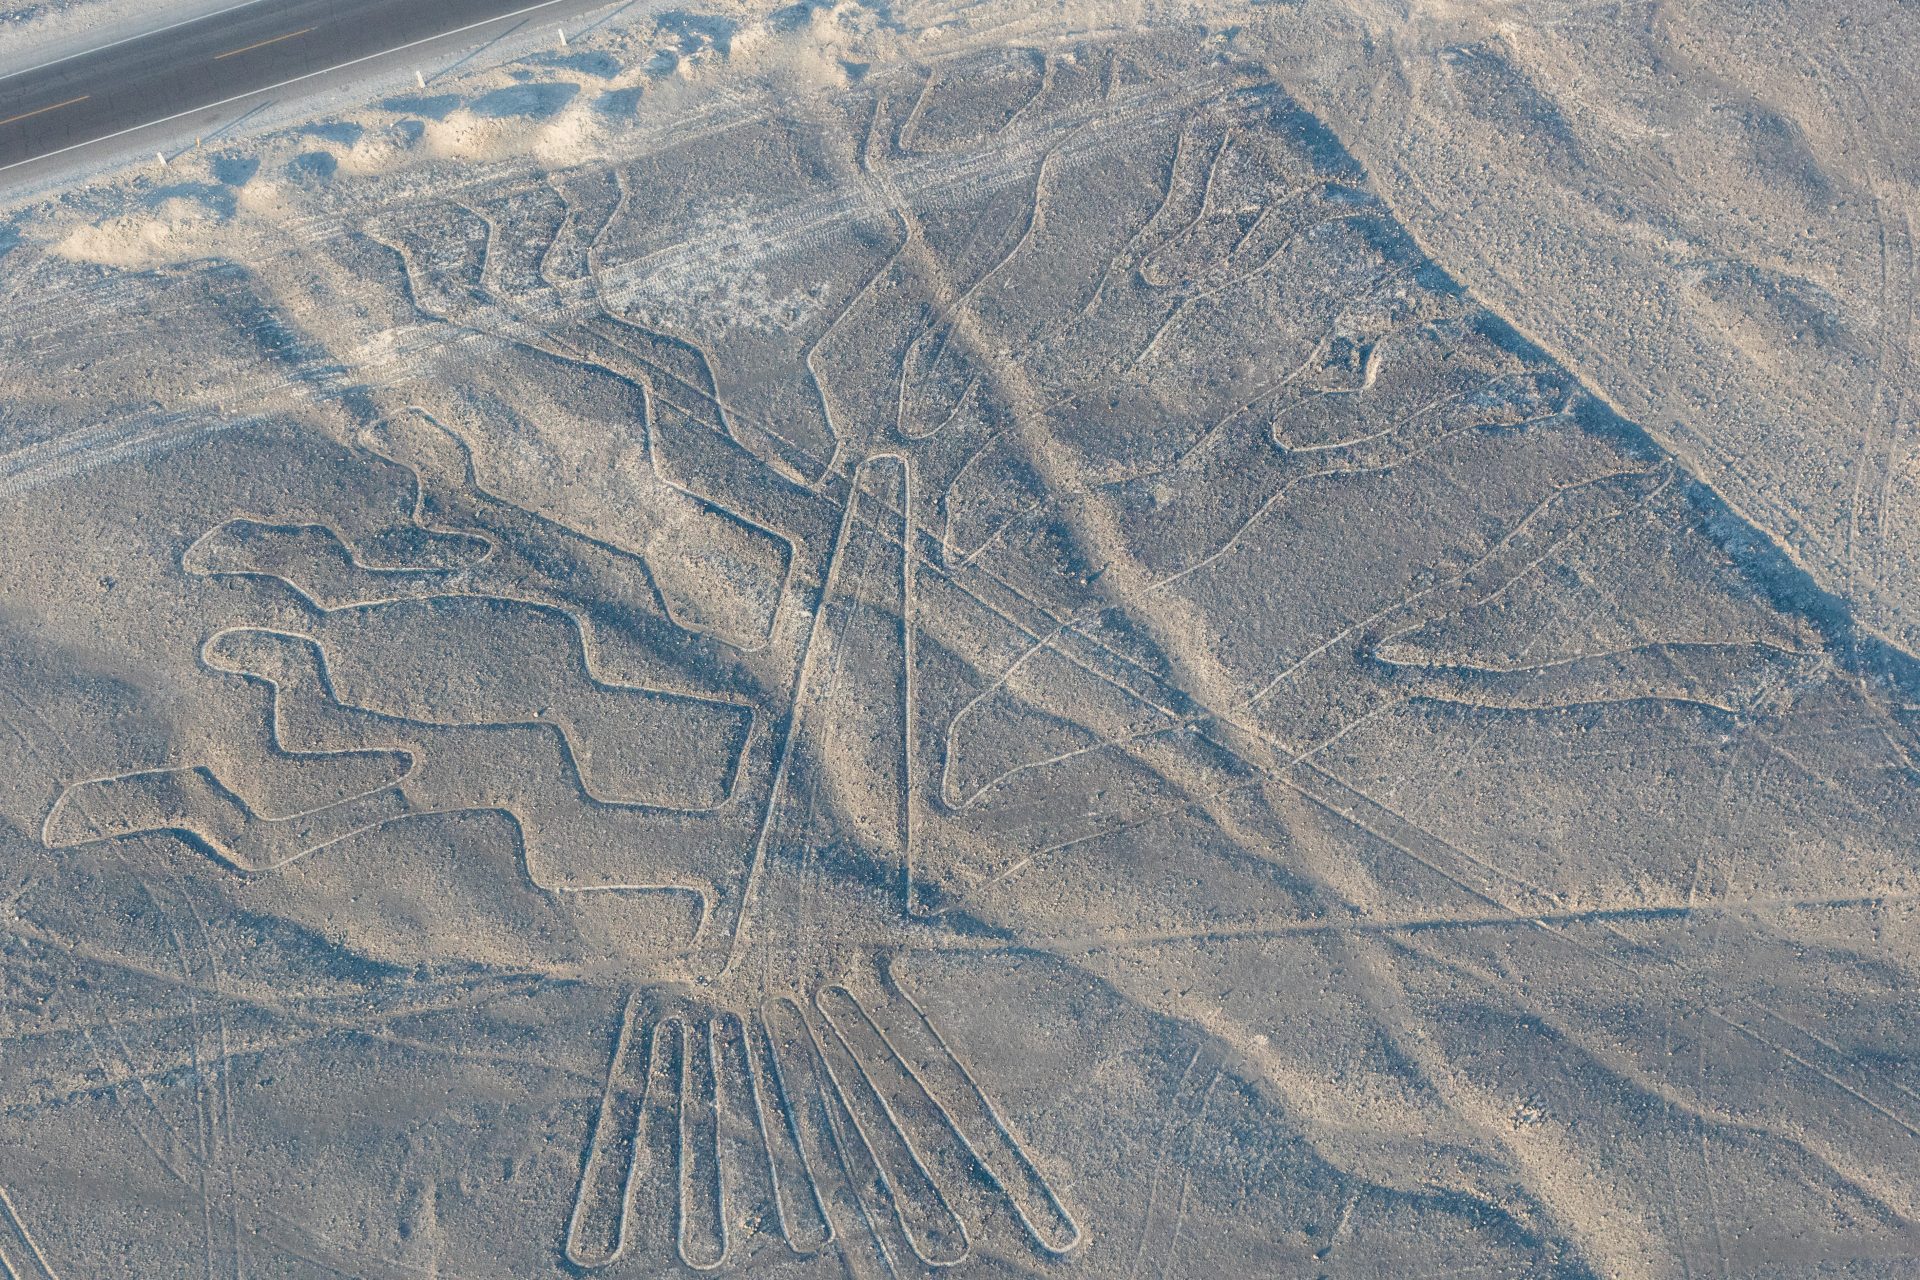 The common myth about the Nazca Lines